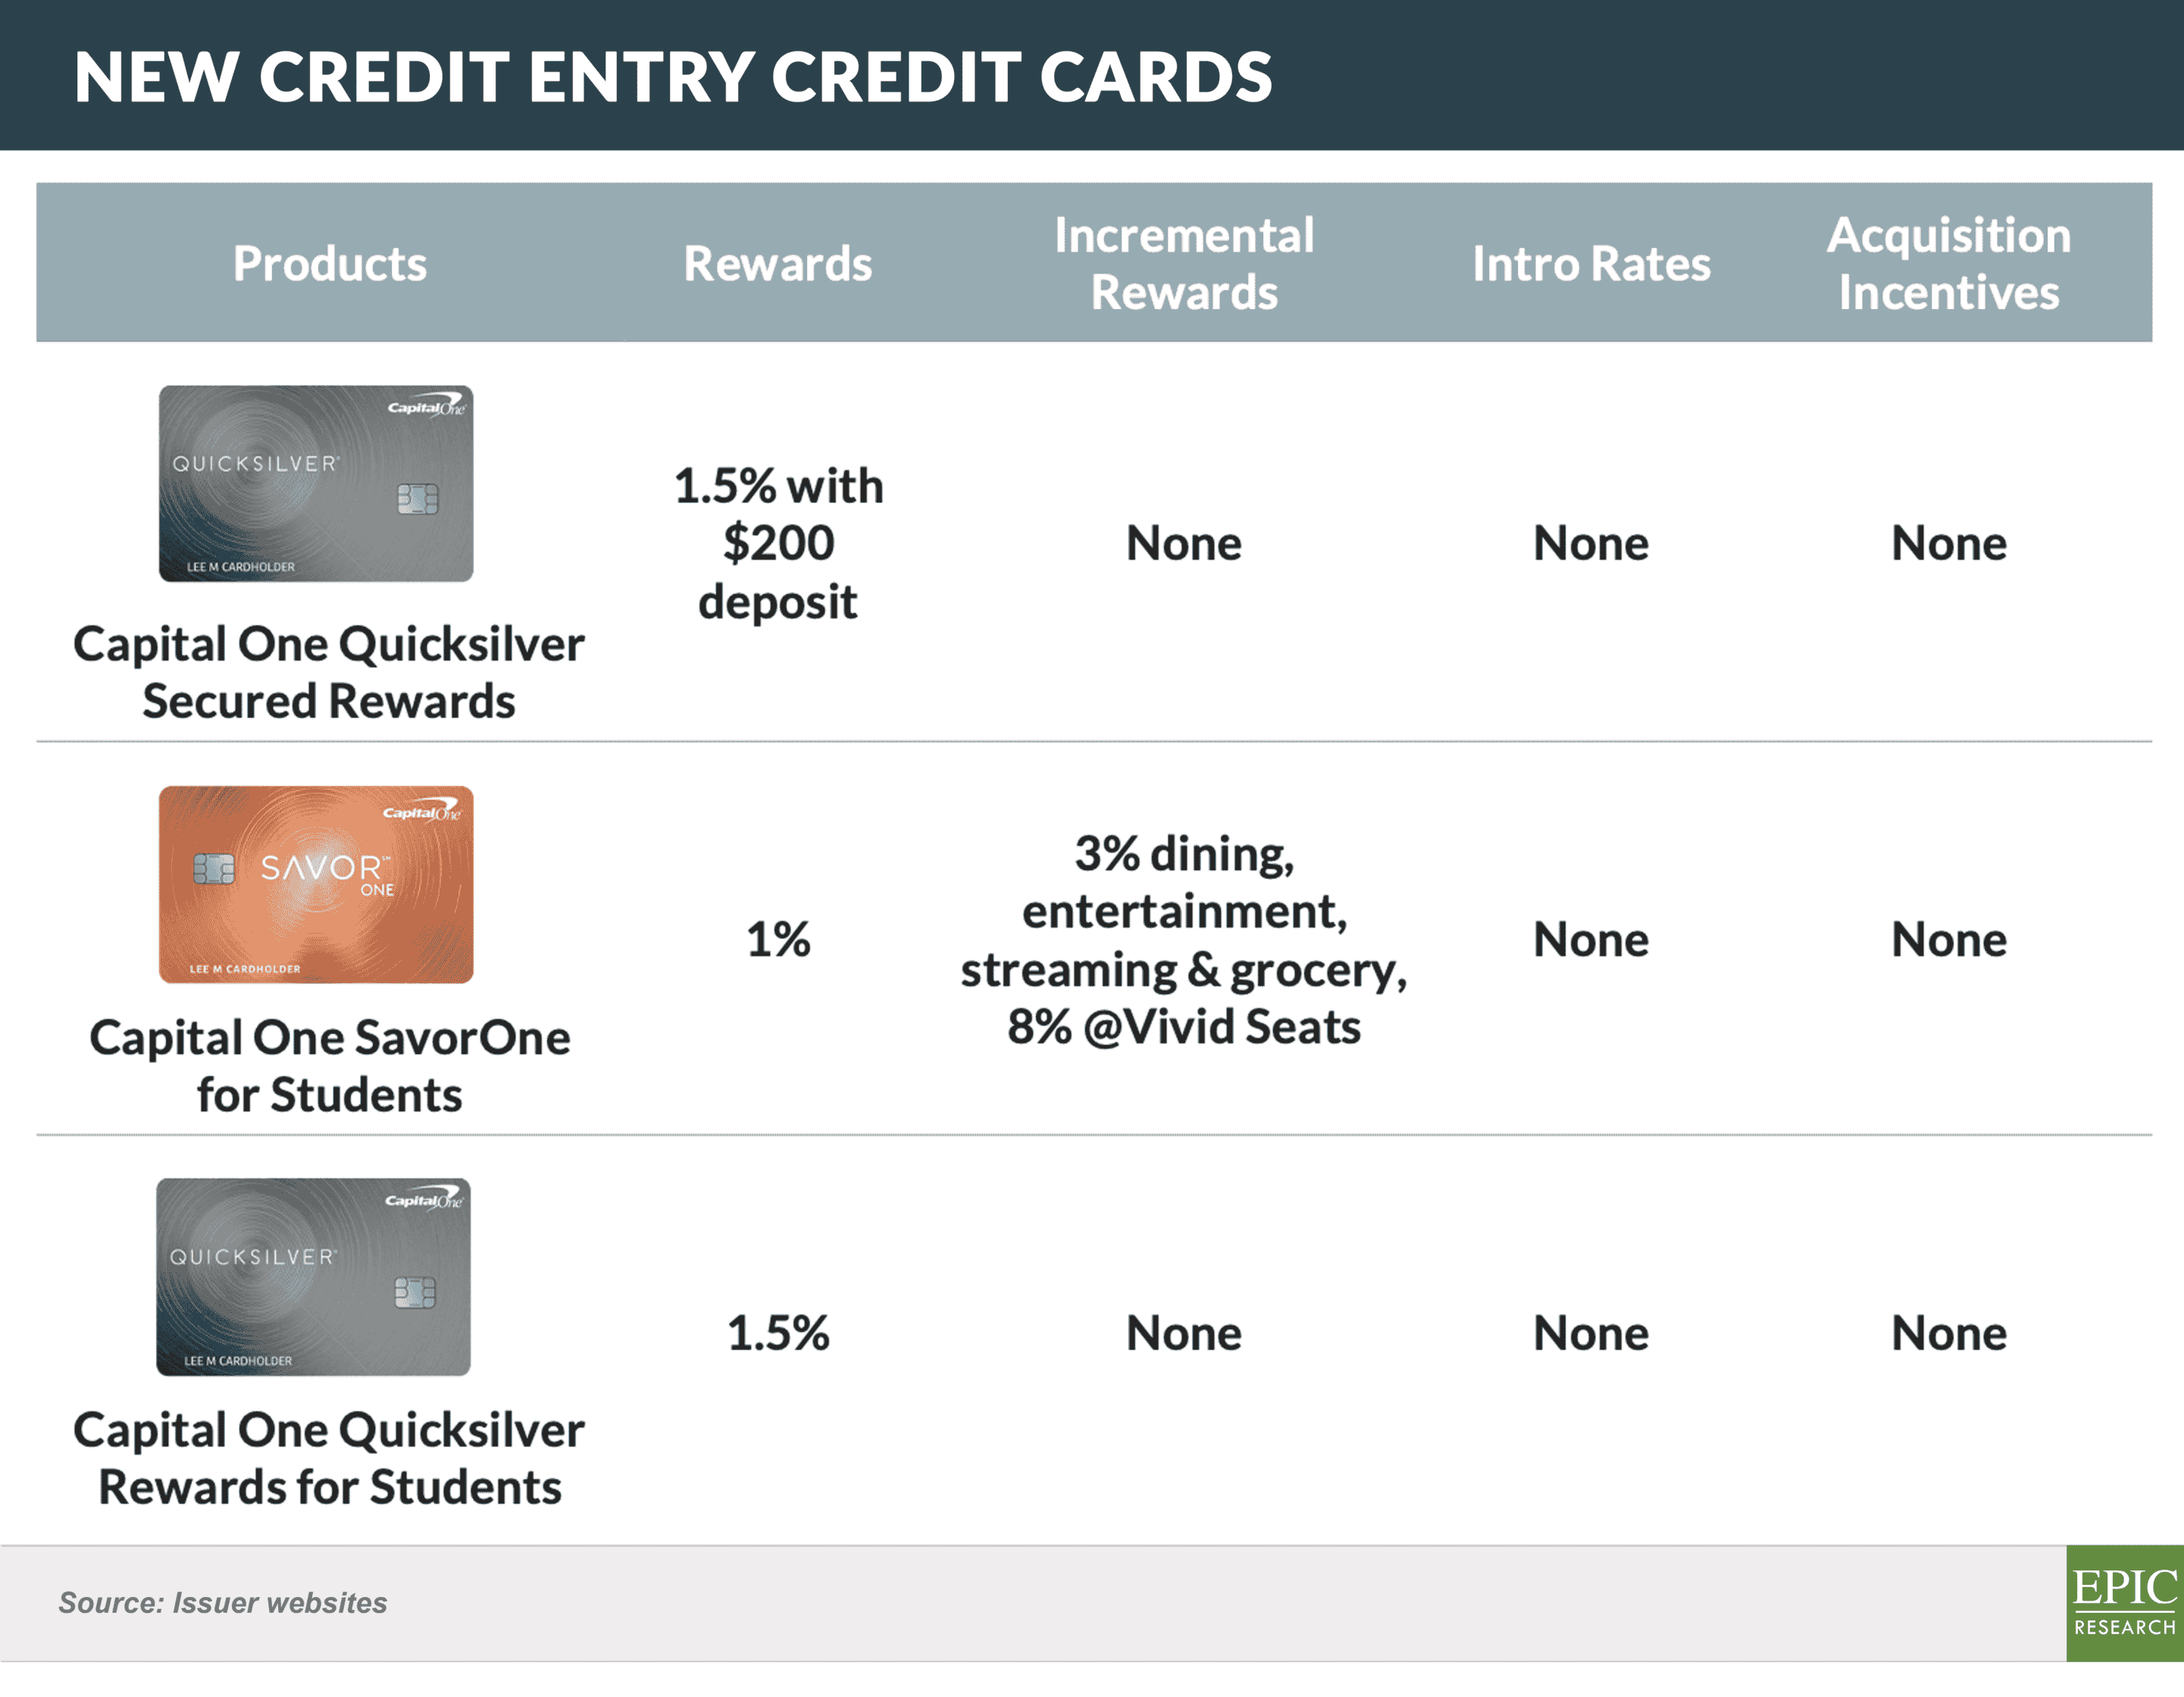 New Credit Entry Credit Cards (1)